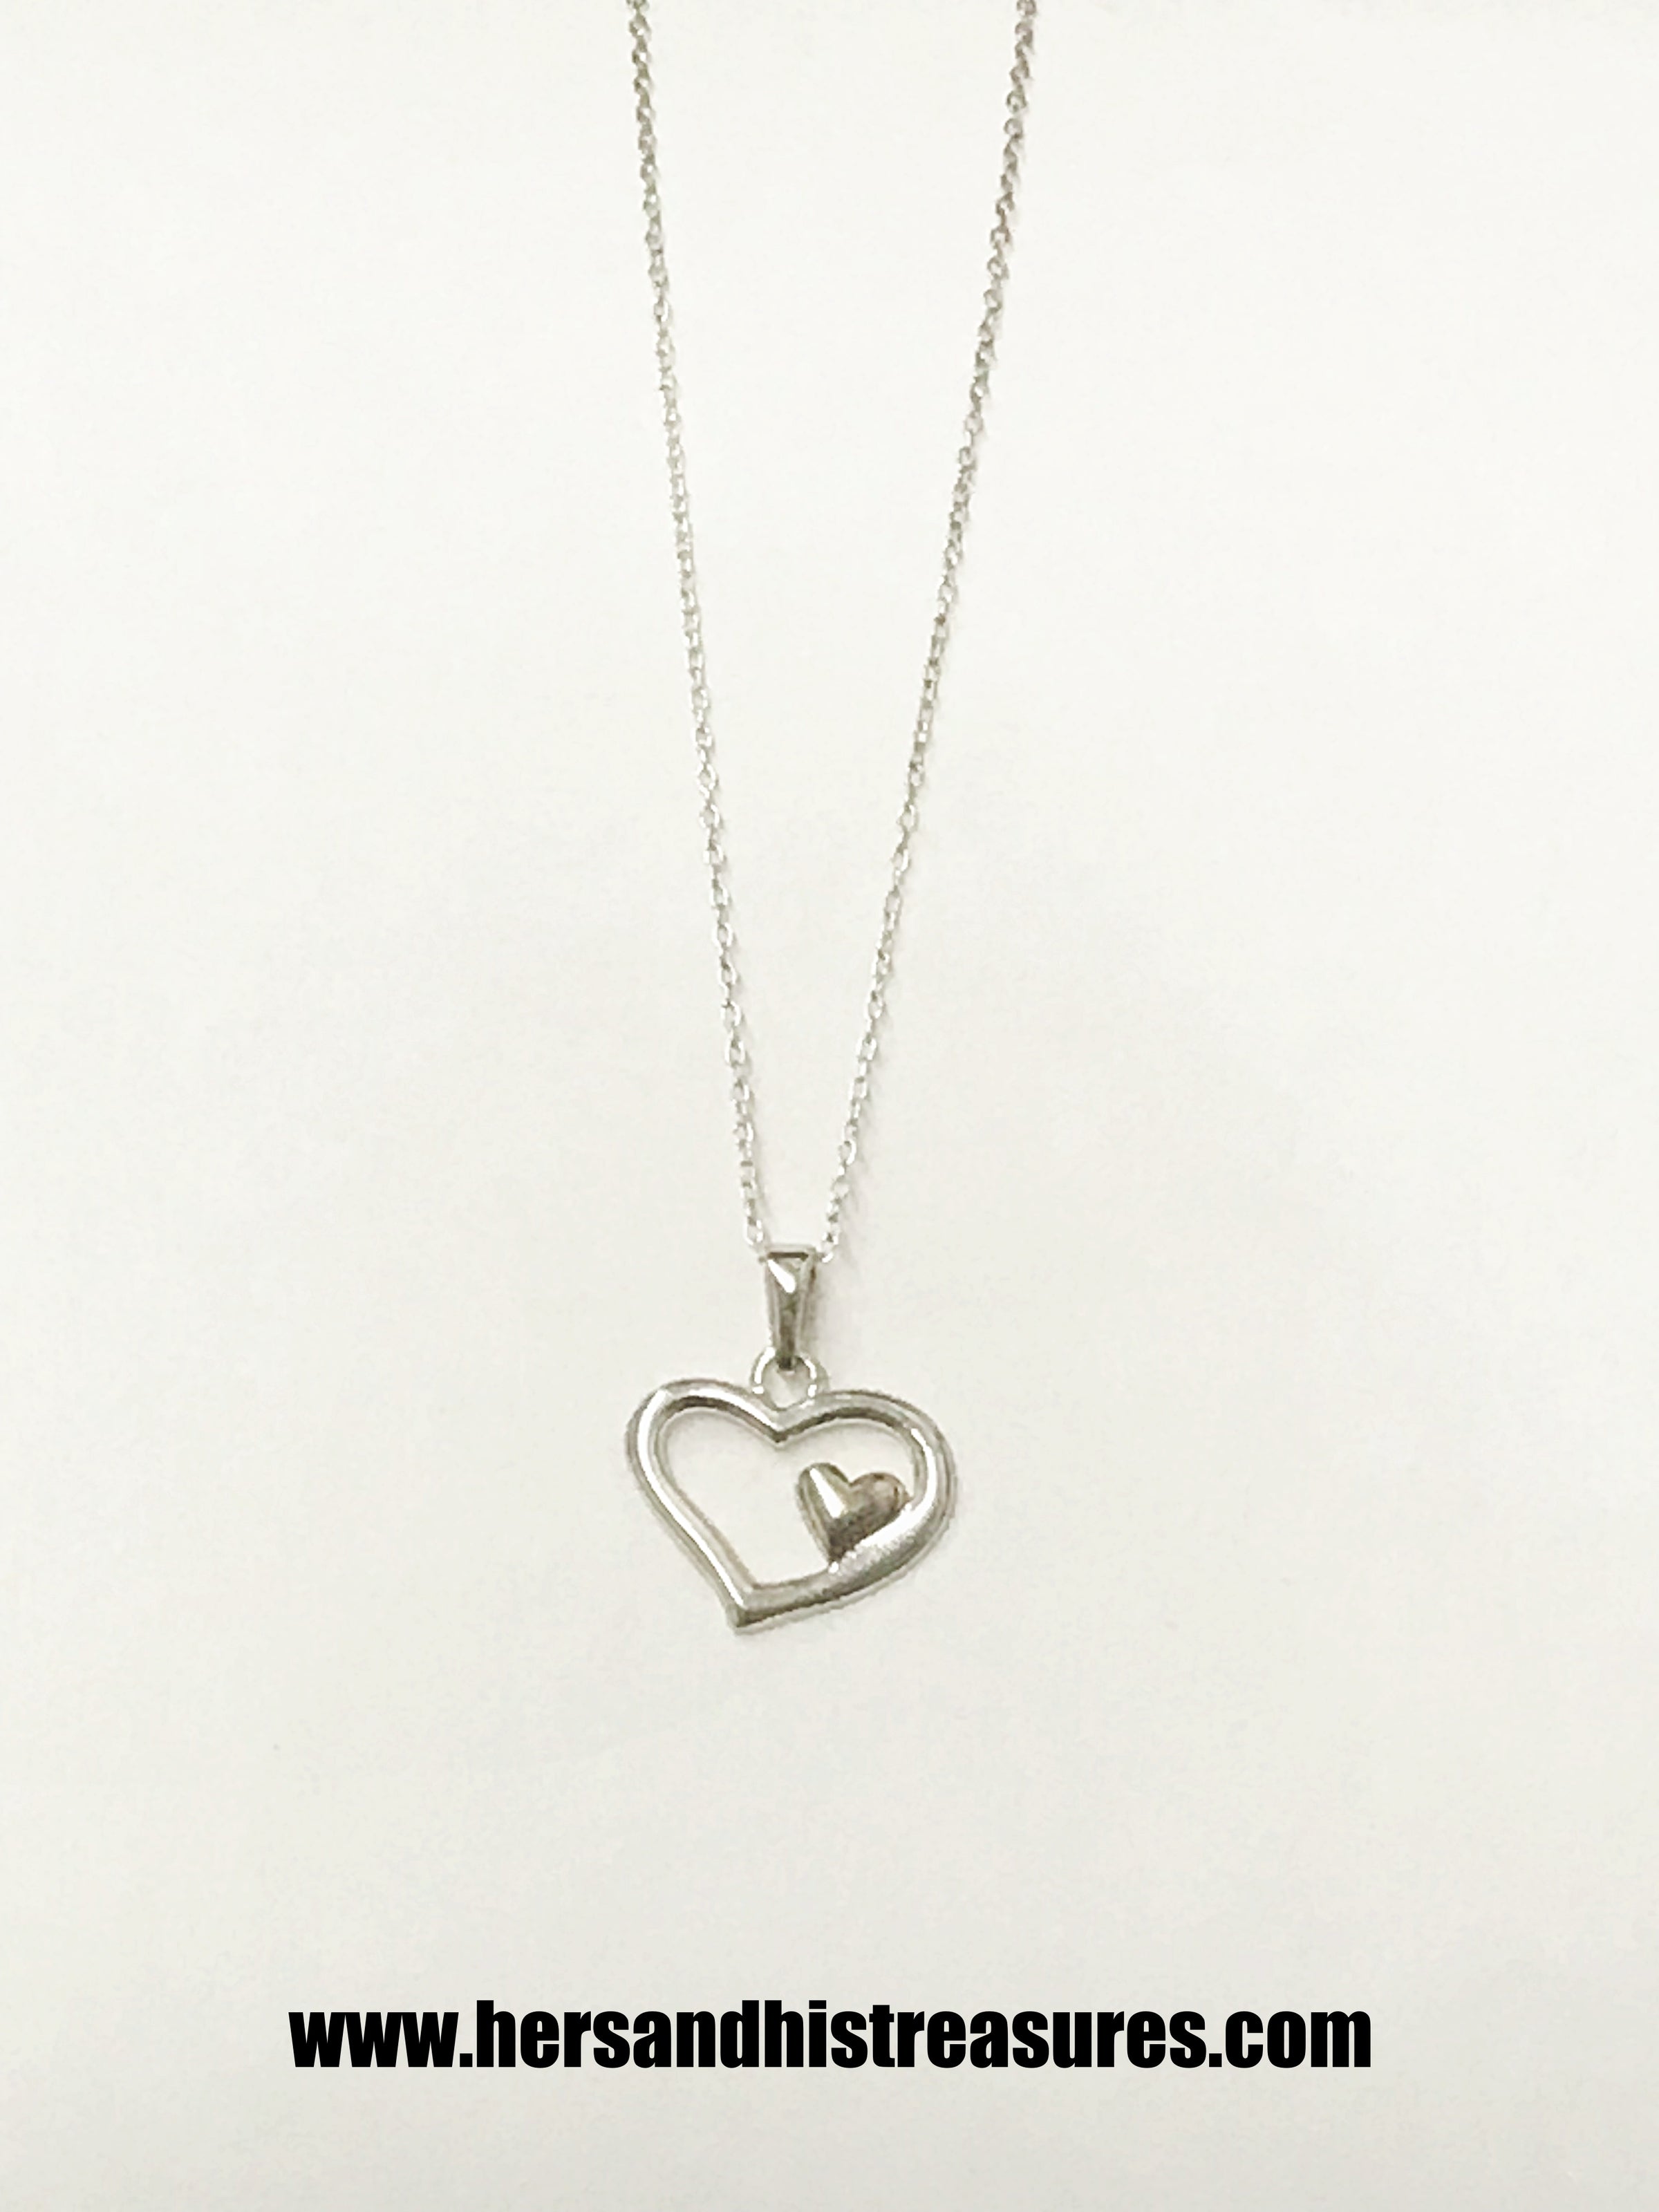 www.hersandhistreasures.com/products/heart-within-a-heart-sterling-silver-necklace